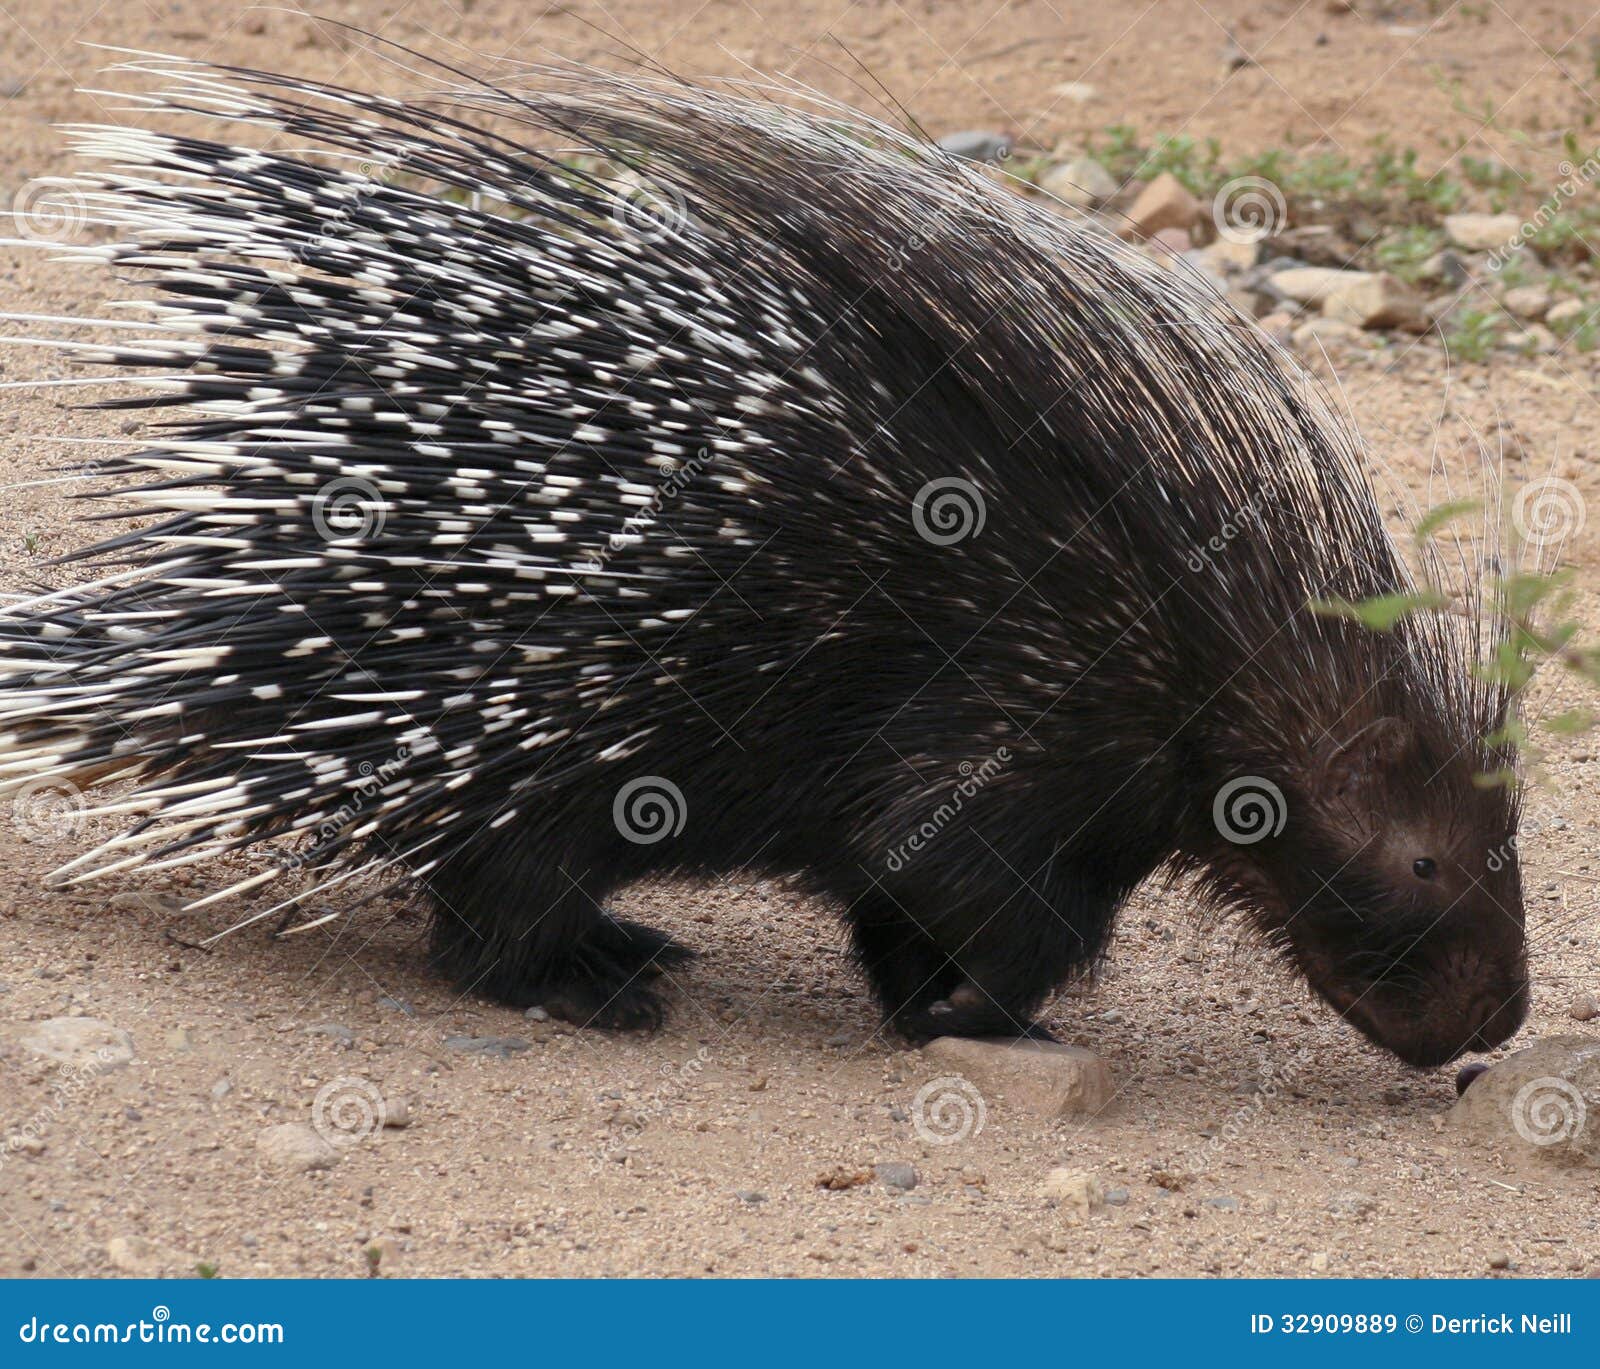 an african crested porcupine, hystrix cristata